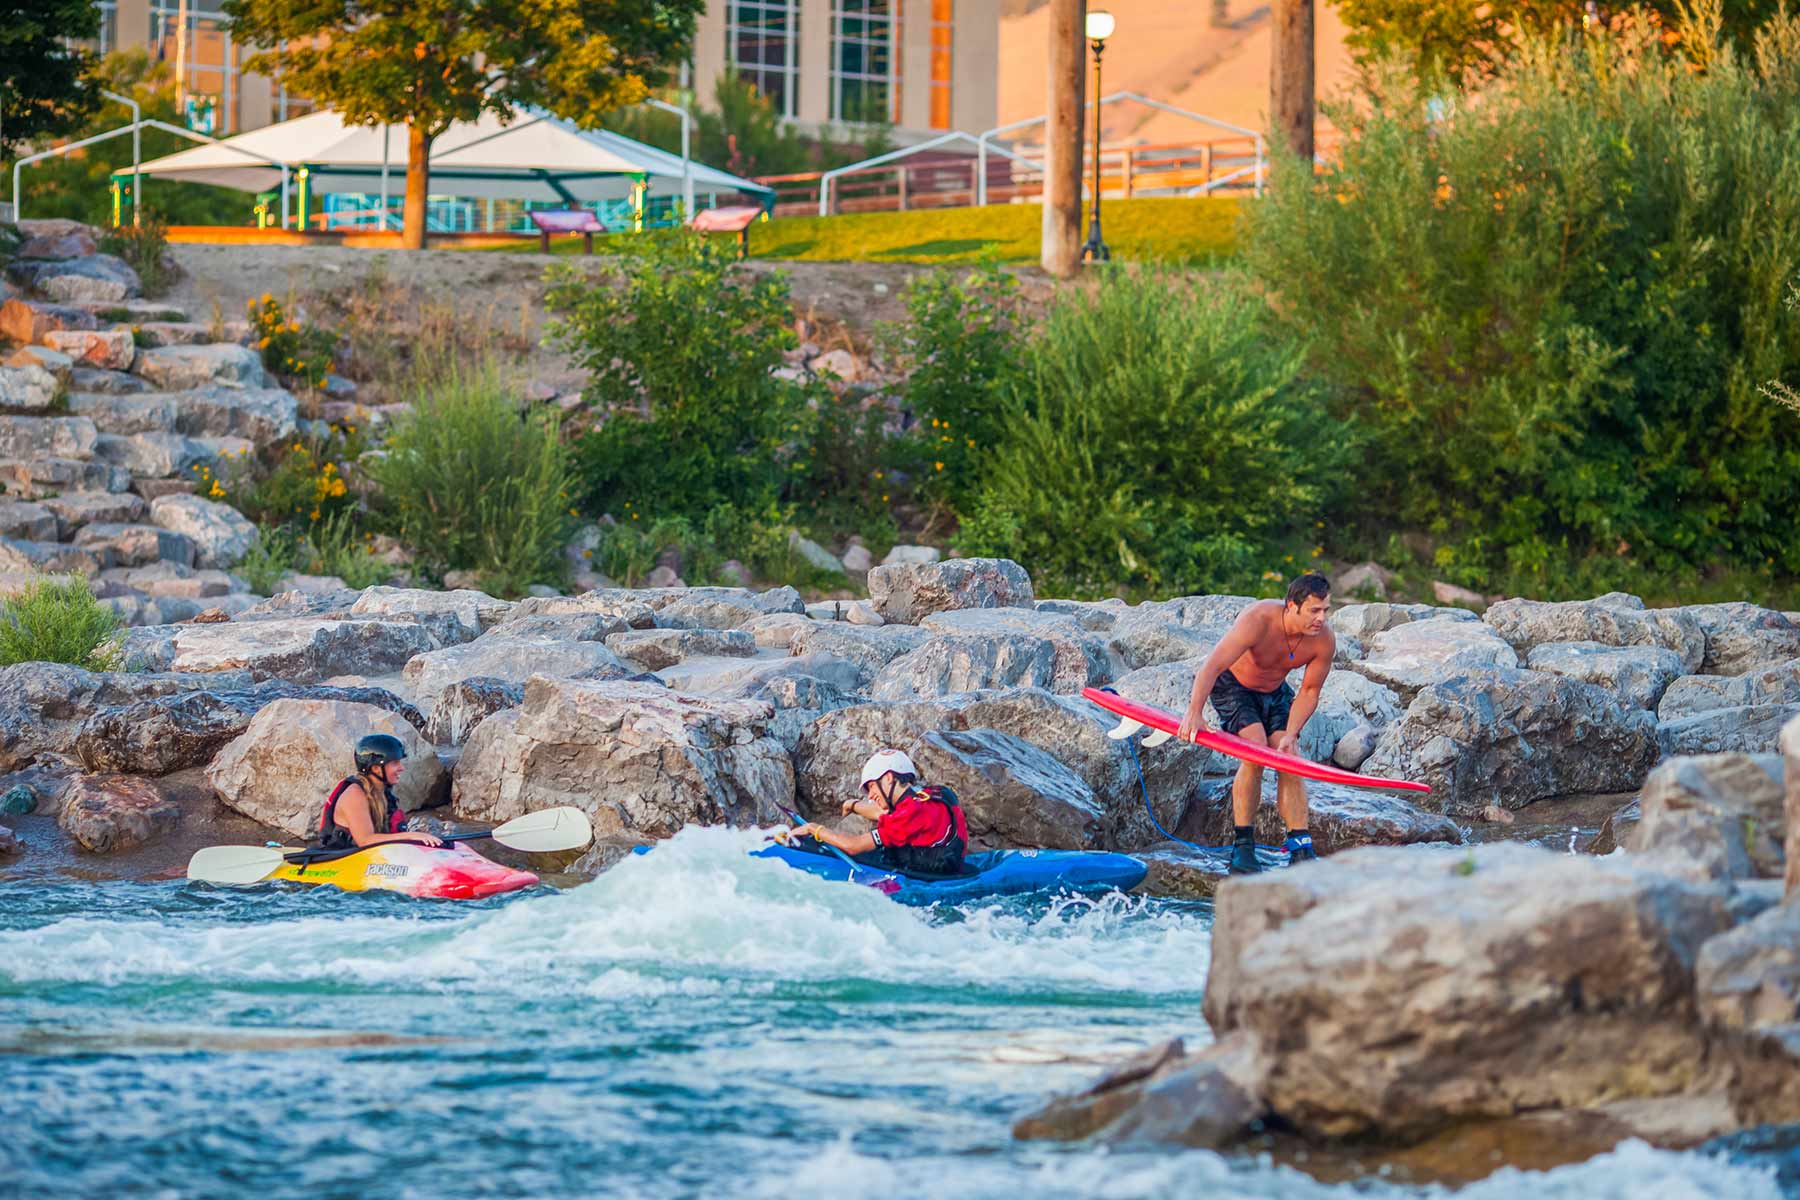 5 River Activities To Try in Missoula, Montana